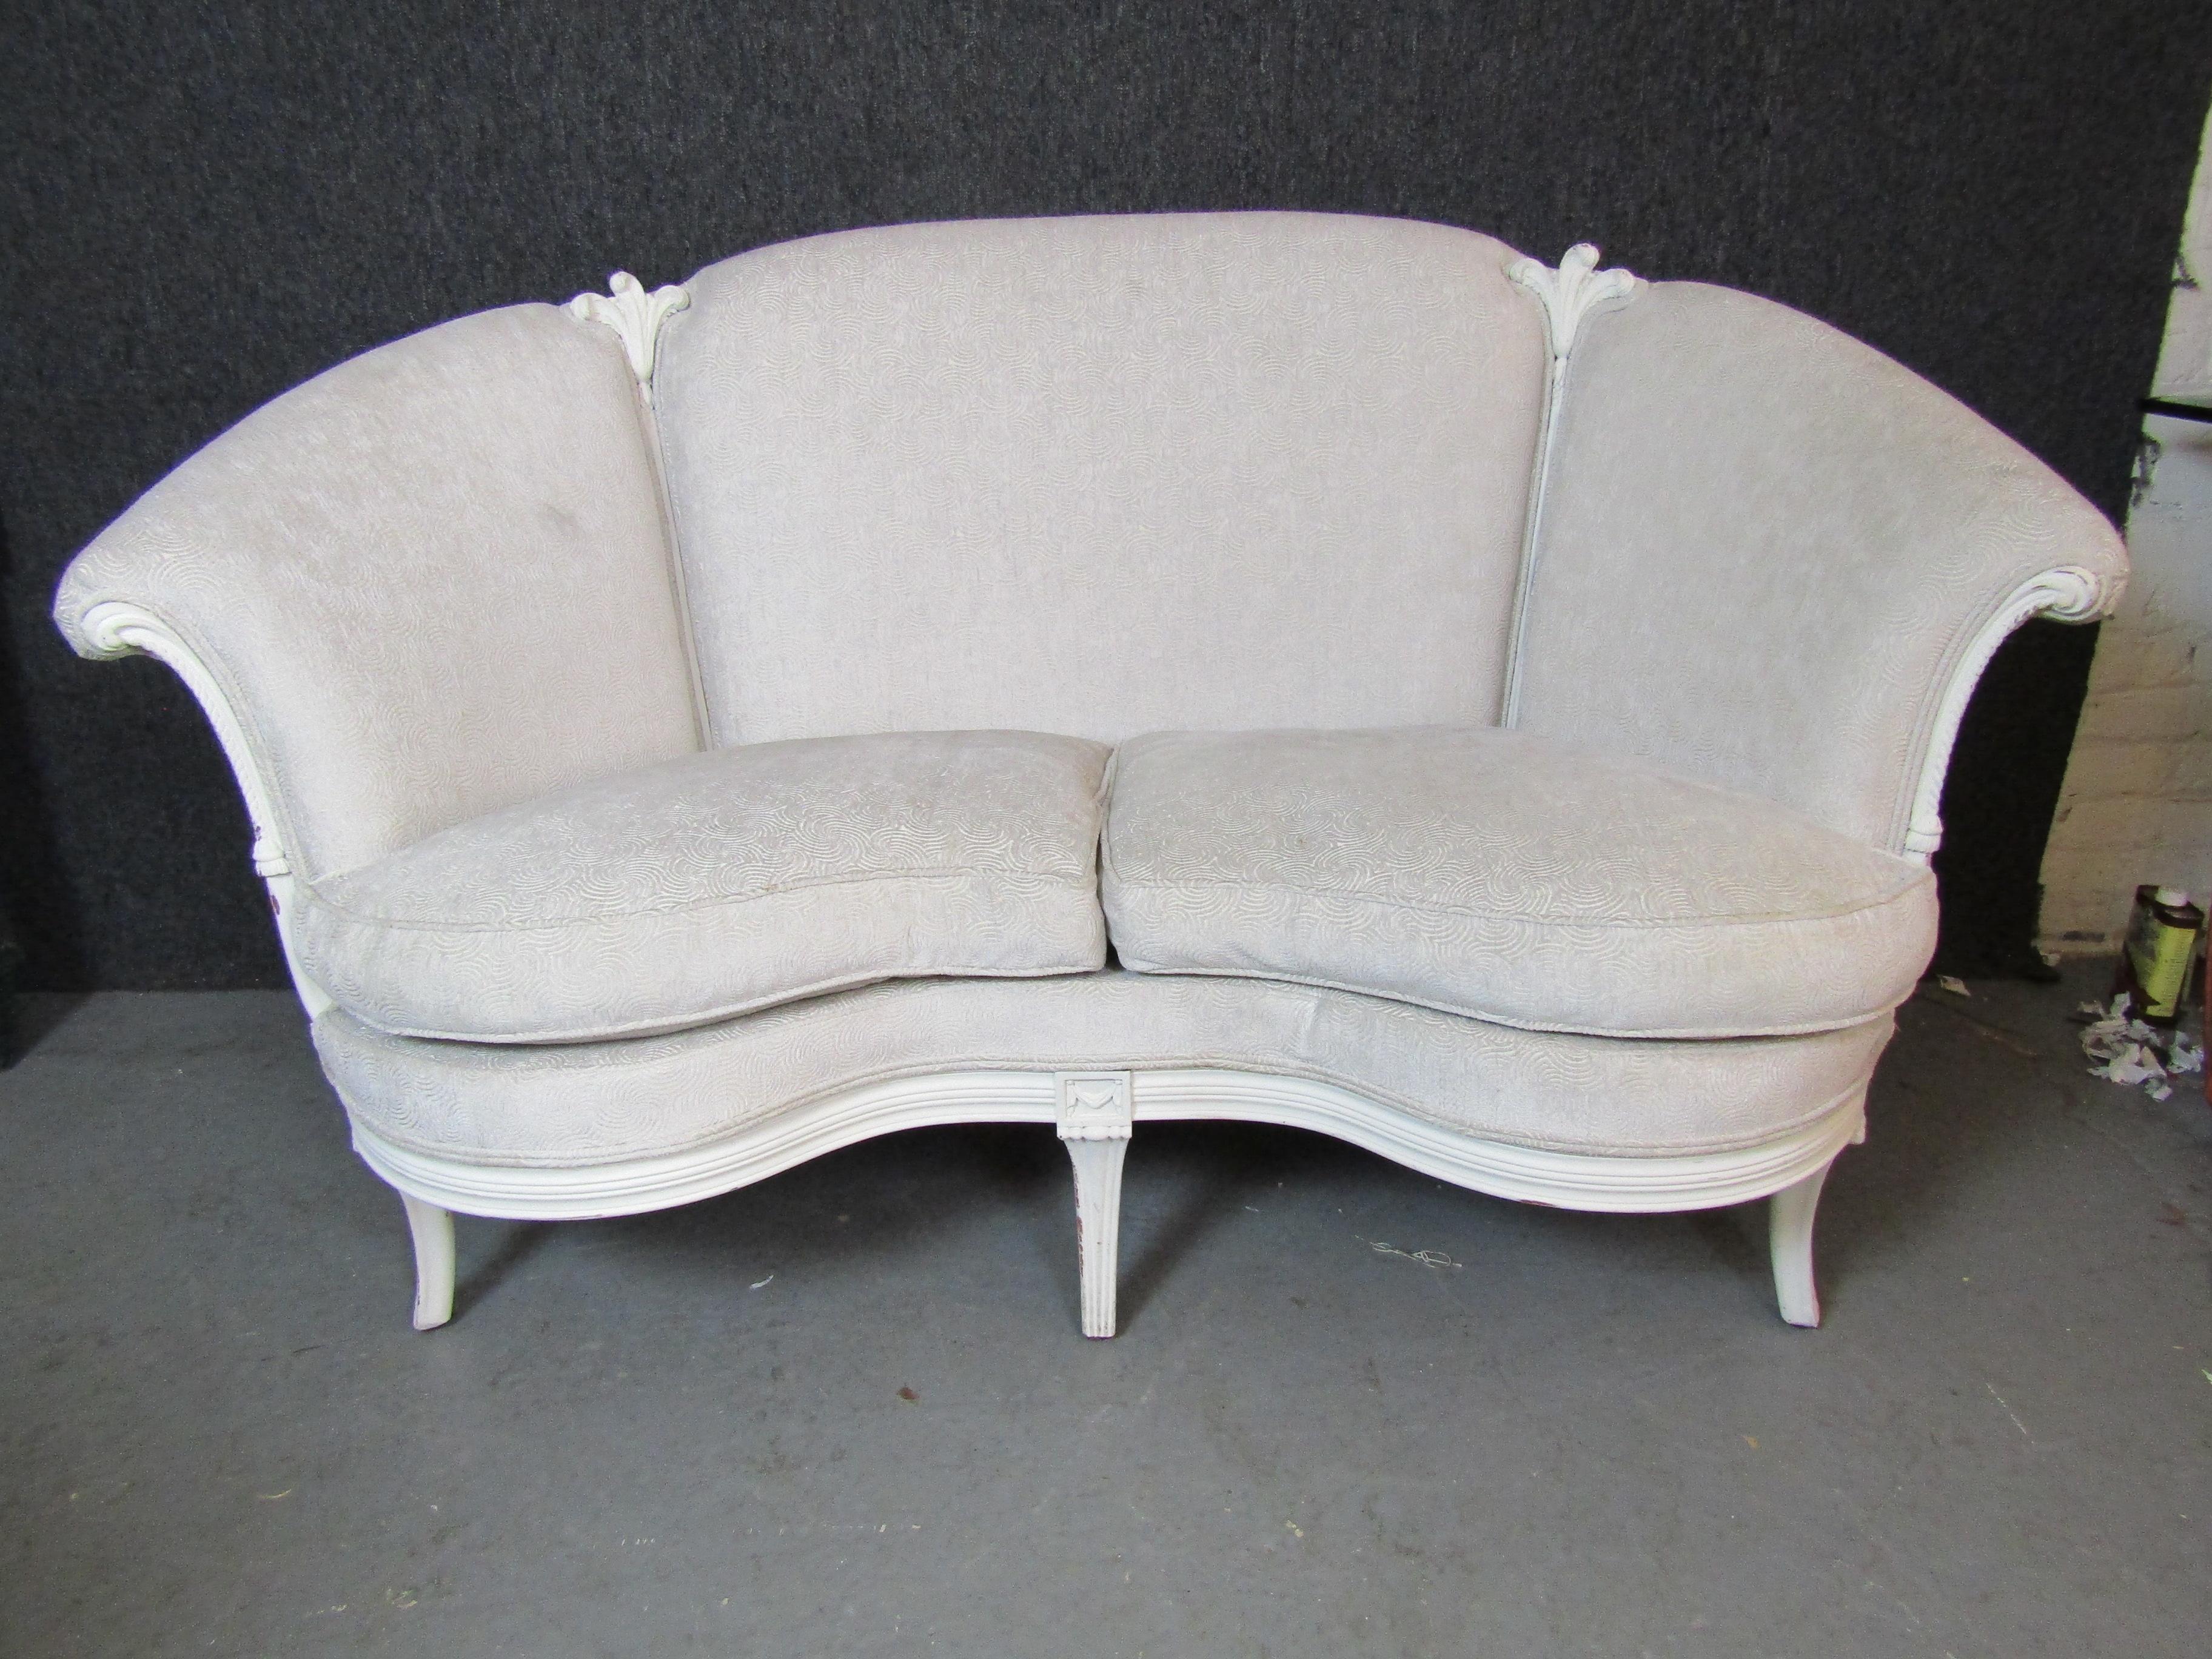 Antique revival loveseat with French inspired wood carved frame and soft cushions. Decorative detailing throughout the sculpted wood frame.
Please confirm location NY or NJ